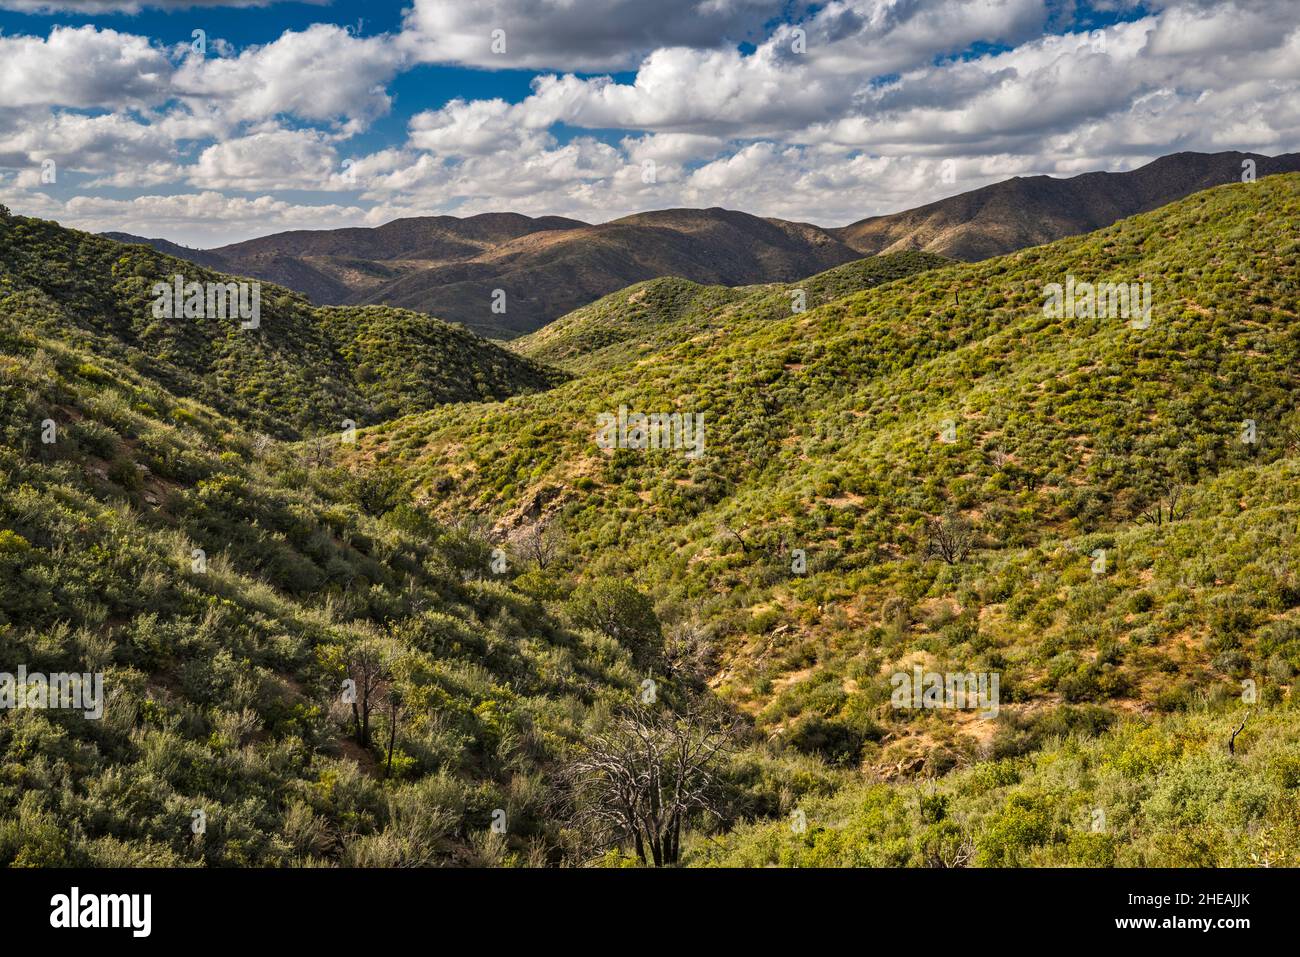 Bradshaw Mountains, chaparral shrubland, view from Senator Road 52, south of Goodwin site, backroad in Prescott National Forest, Arizona, USA Stock Photo